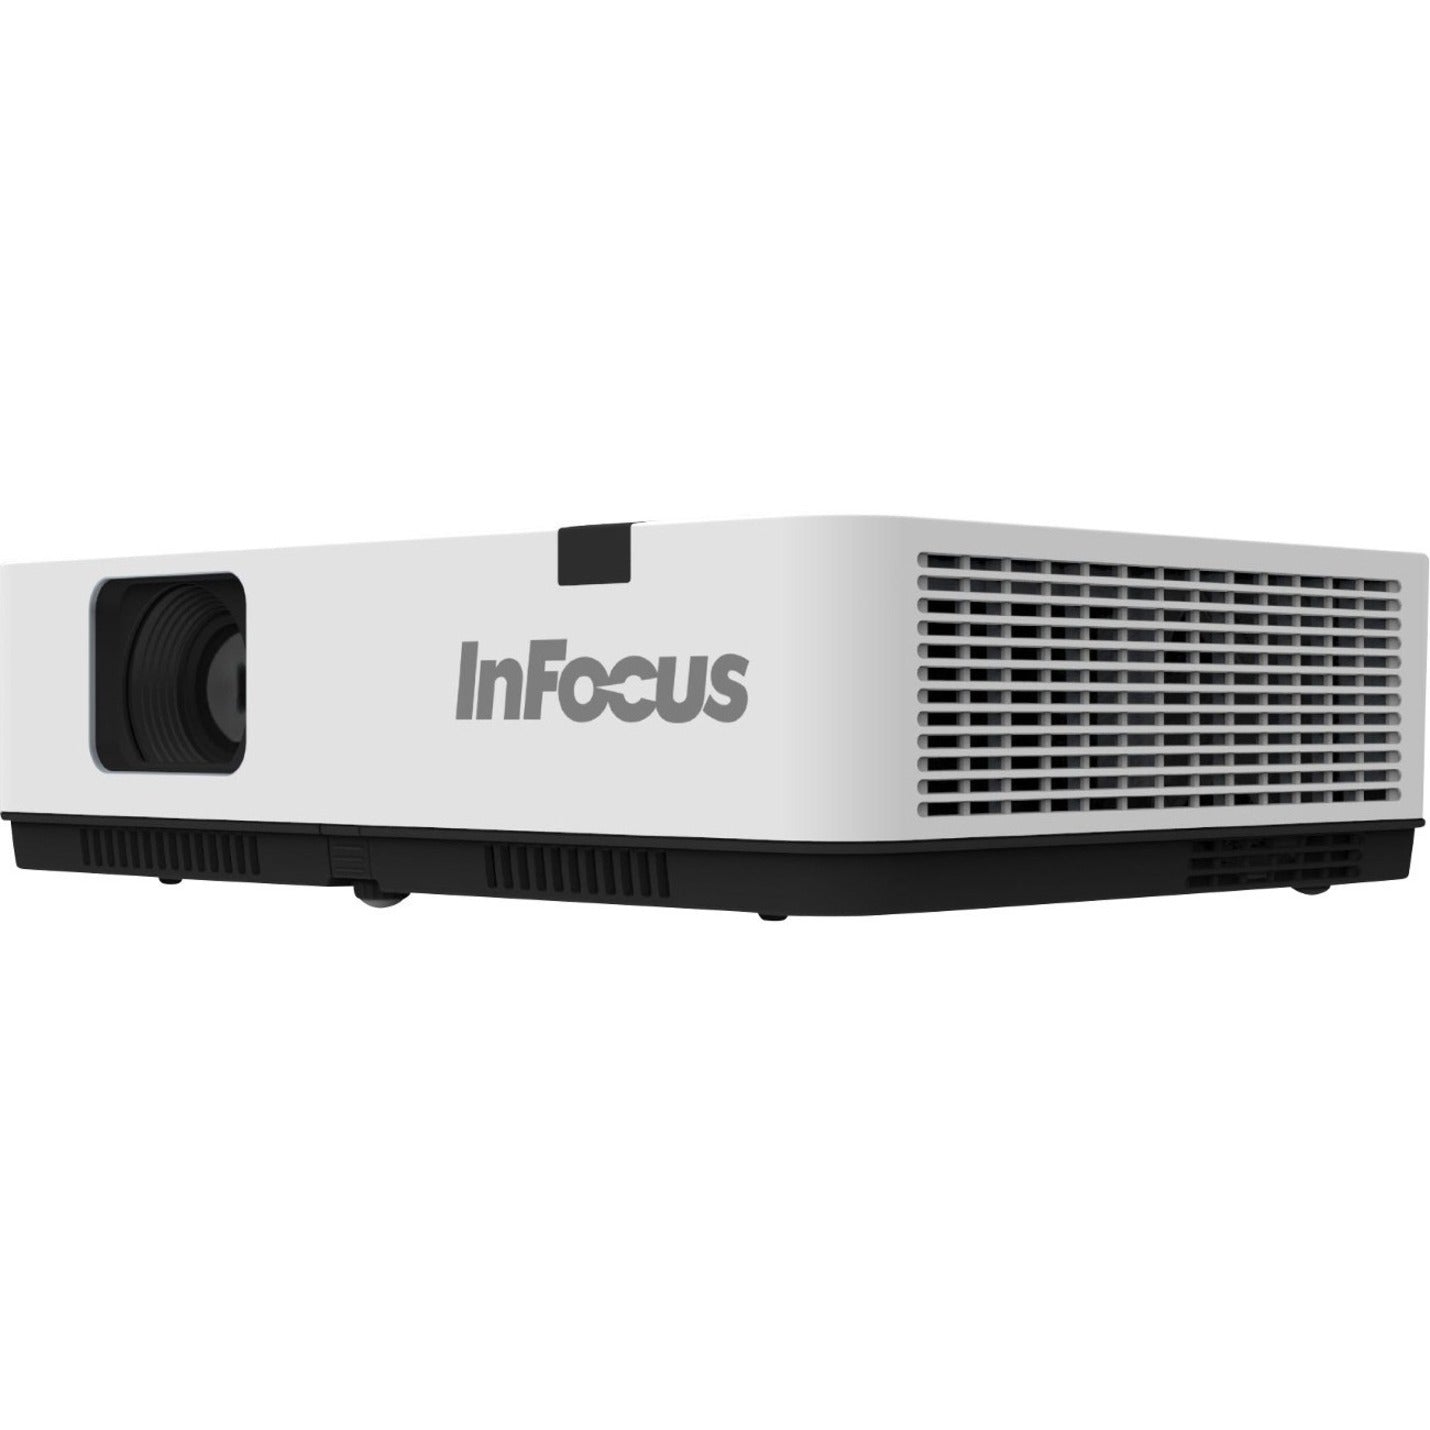 InFocus IN1029 Advanced 3LCD Projector, WUXGA, 4200 lm, 16:10